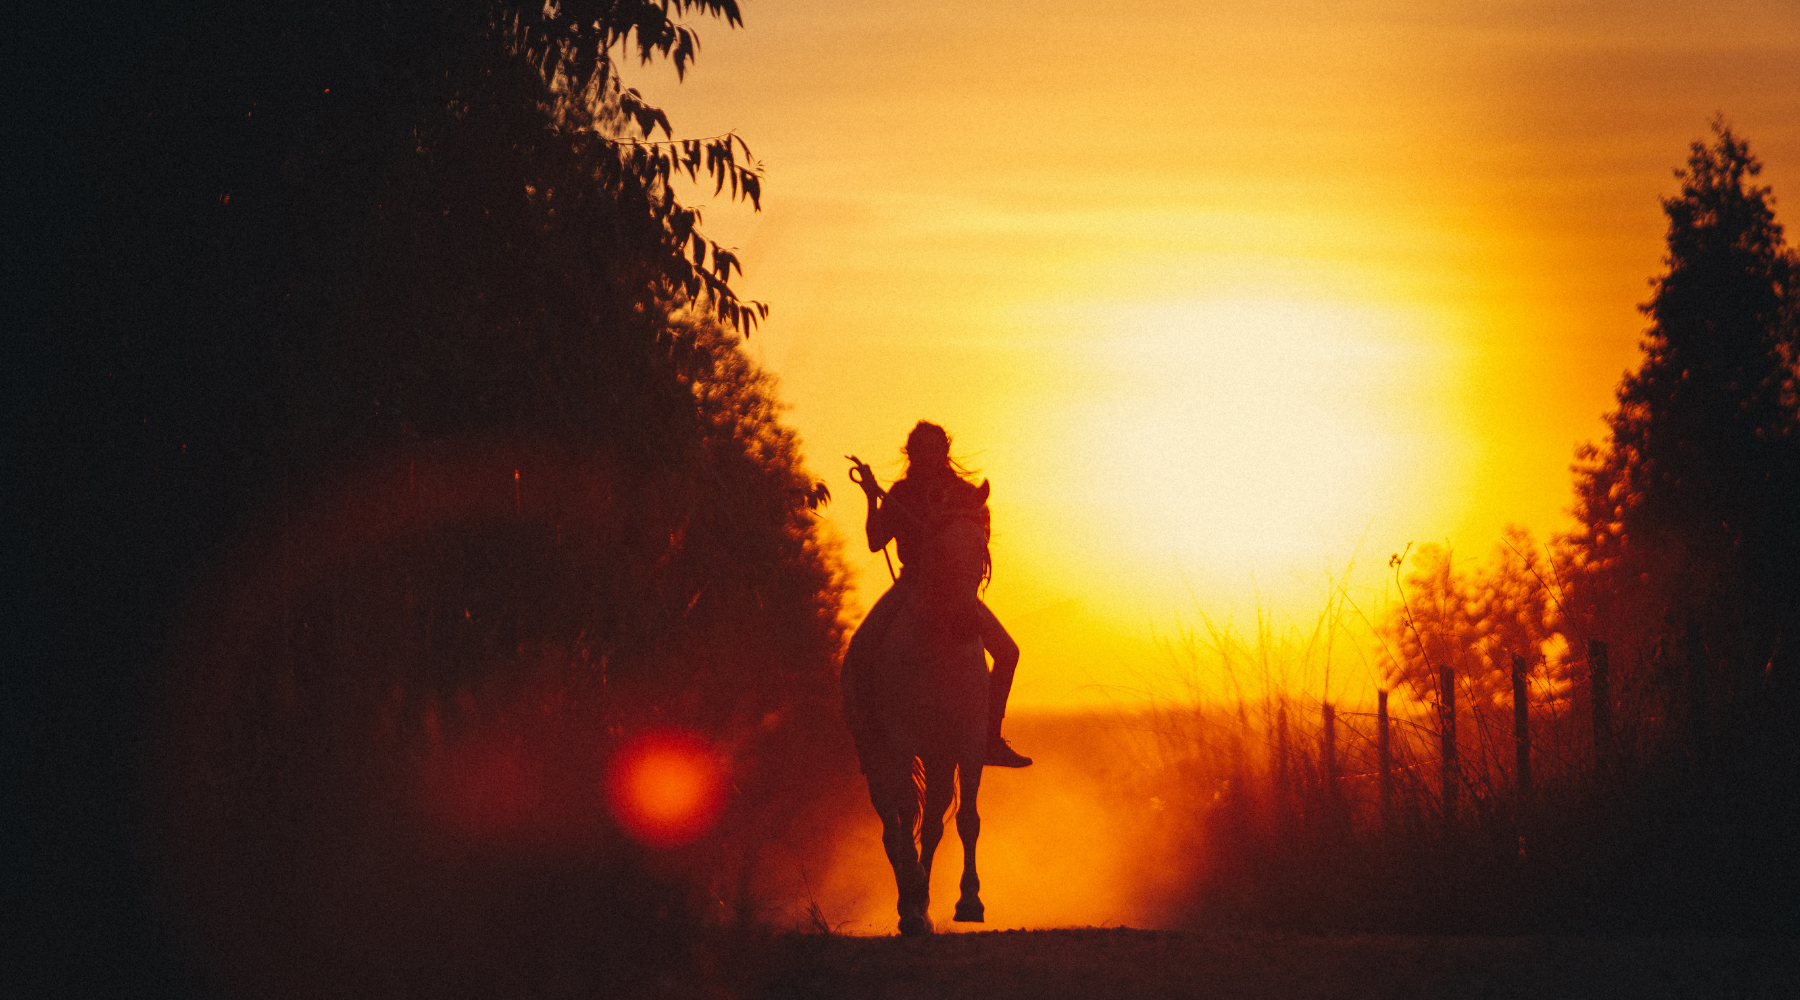 When To Practice What To Become An Intuitive Rider – #1